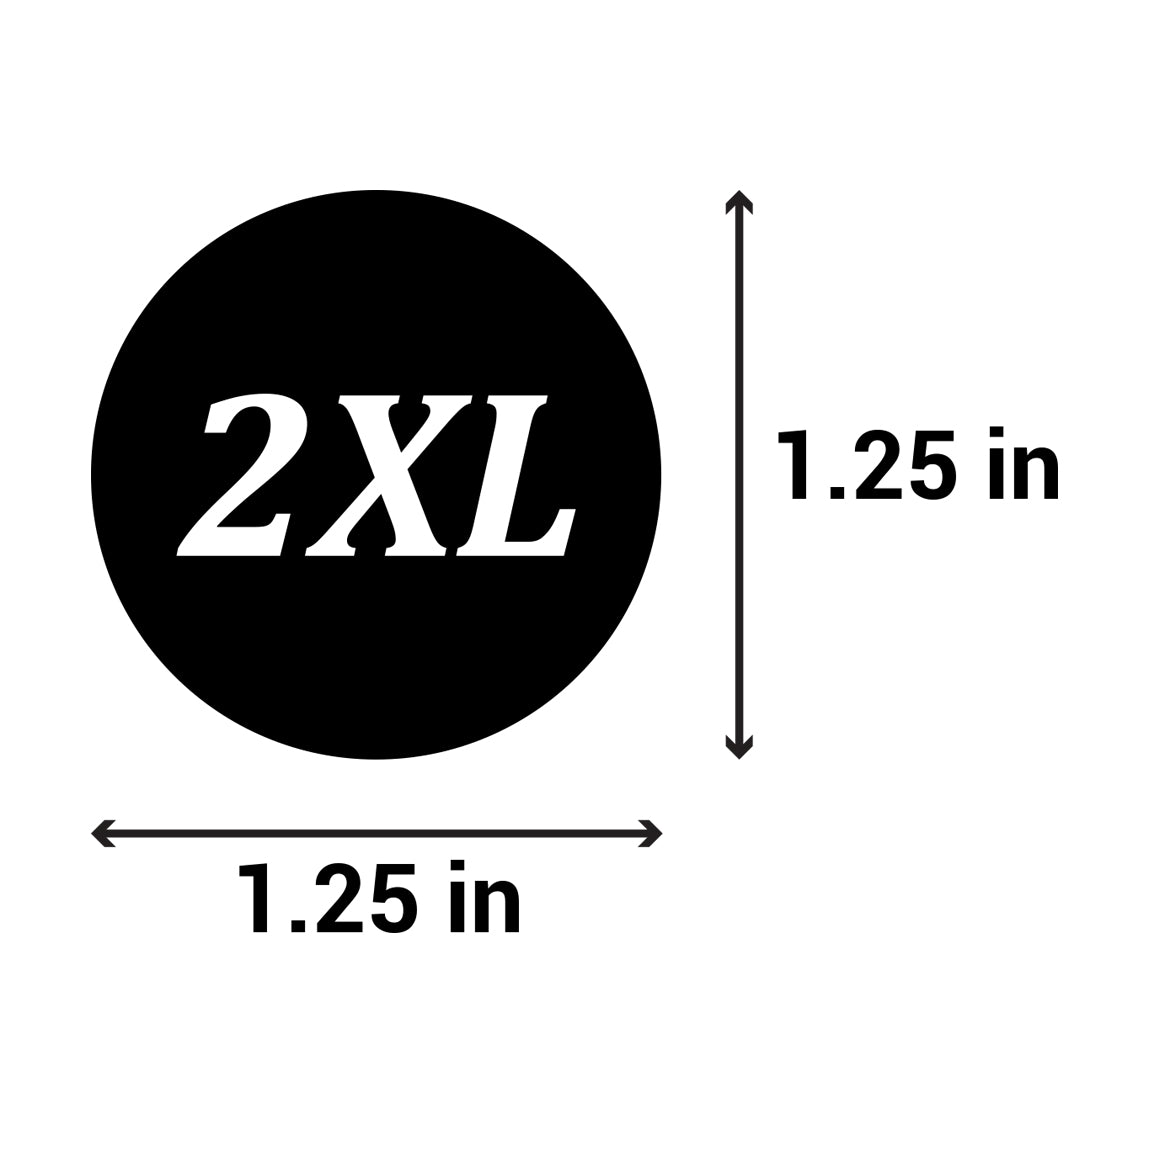 1.25 inch | Shoe & Clothing Size: (2XL) XX-Large Stickers